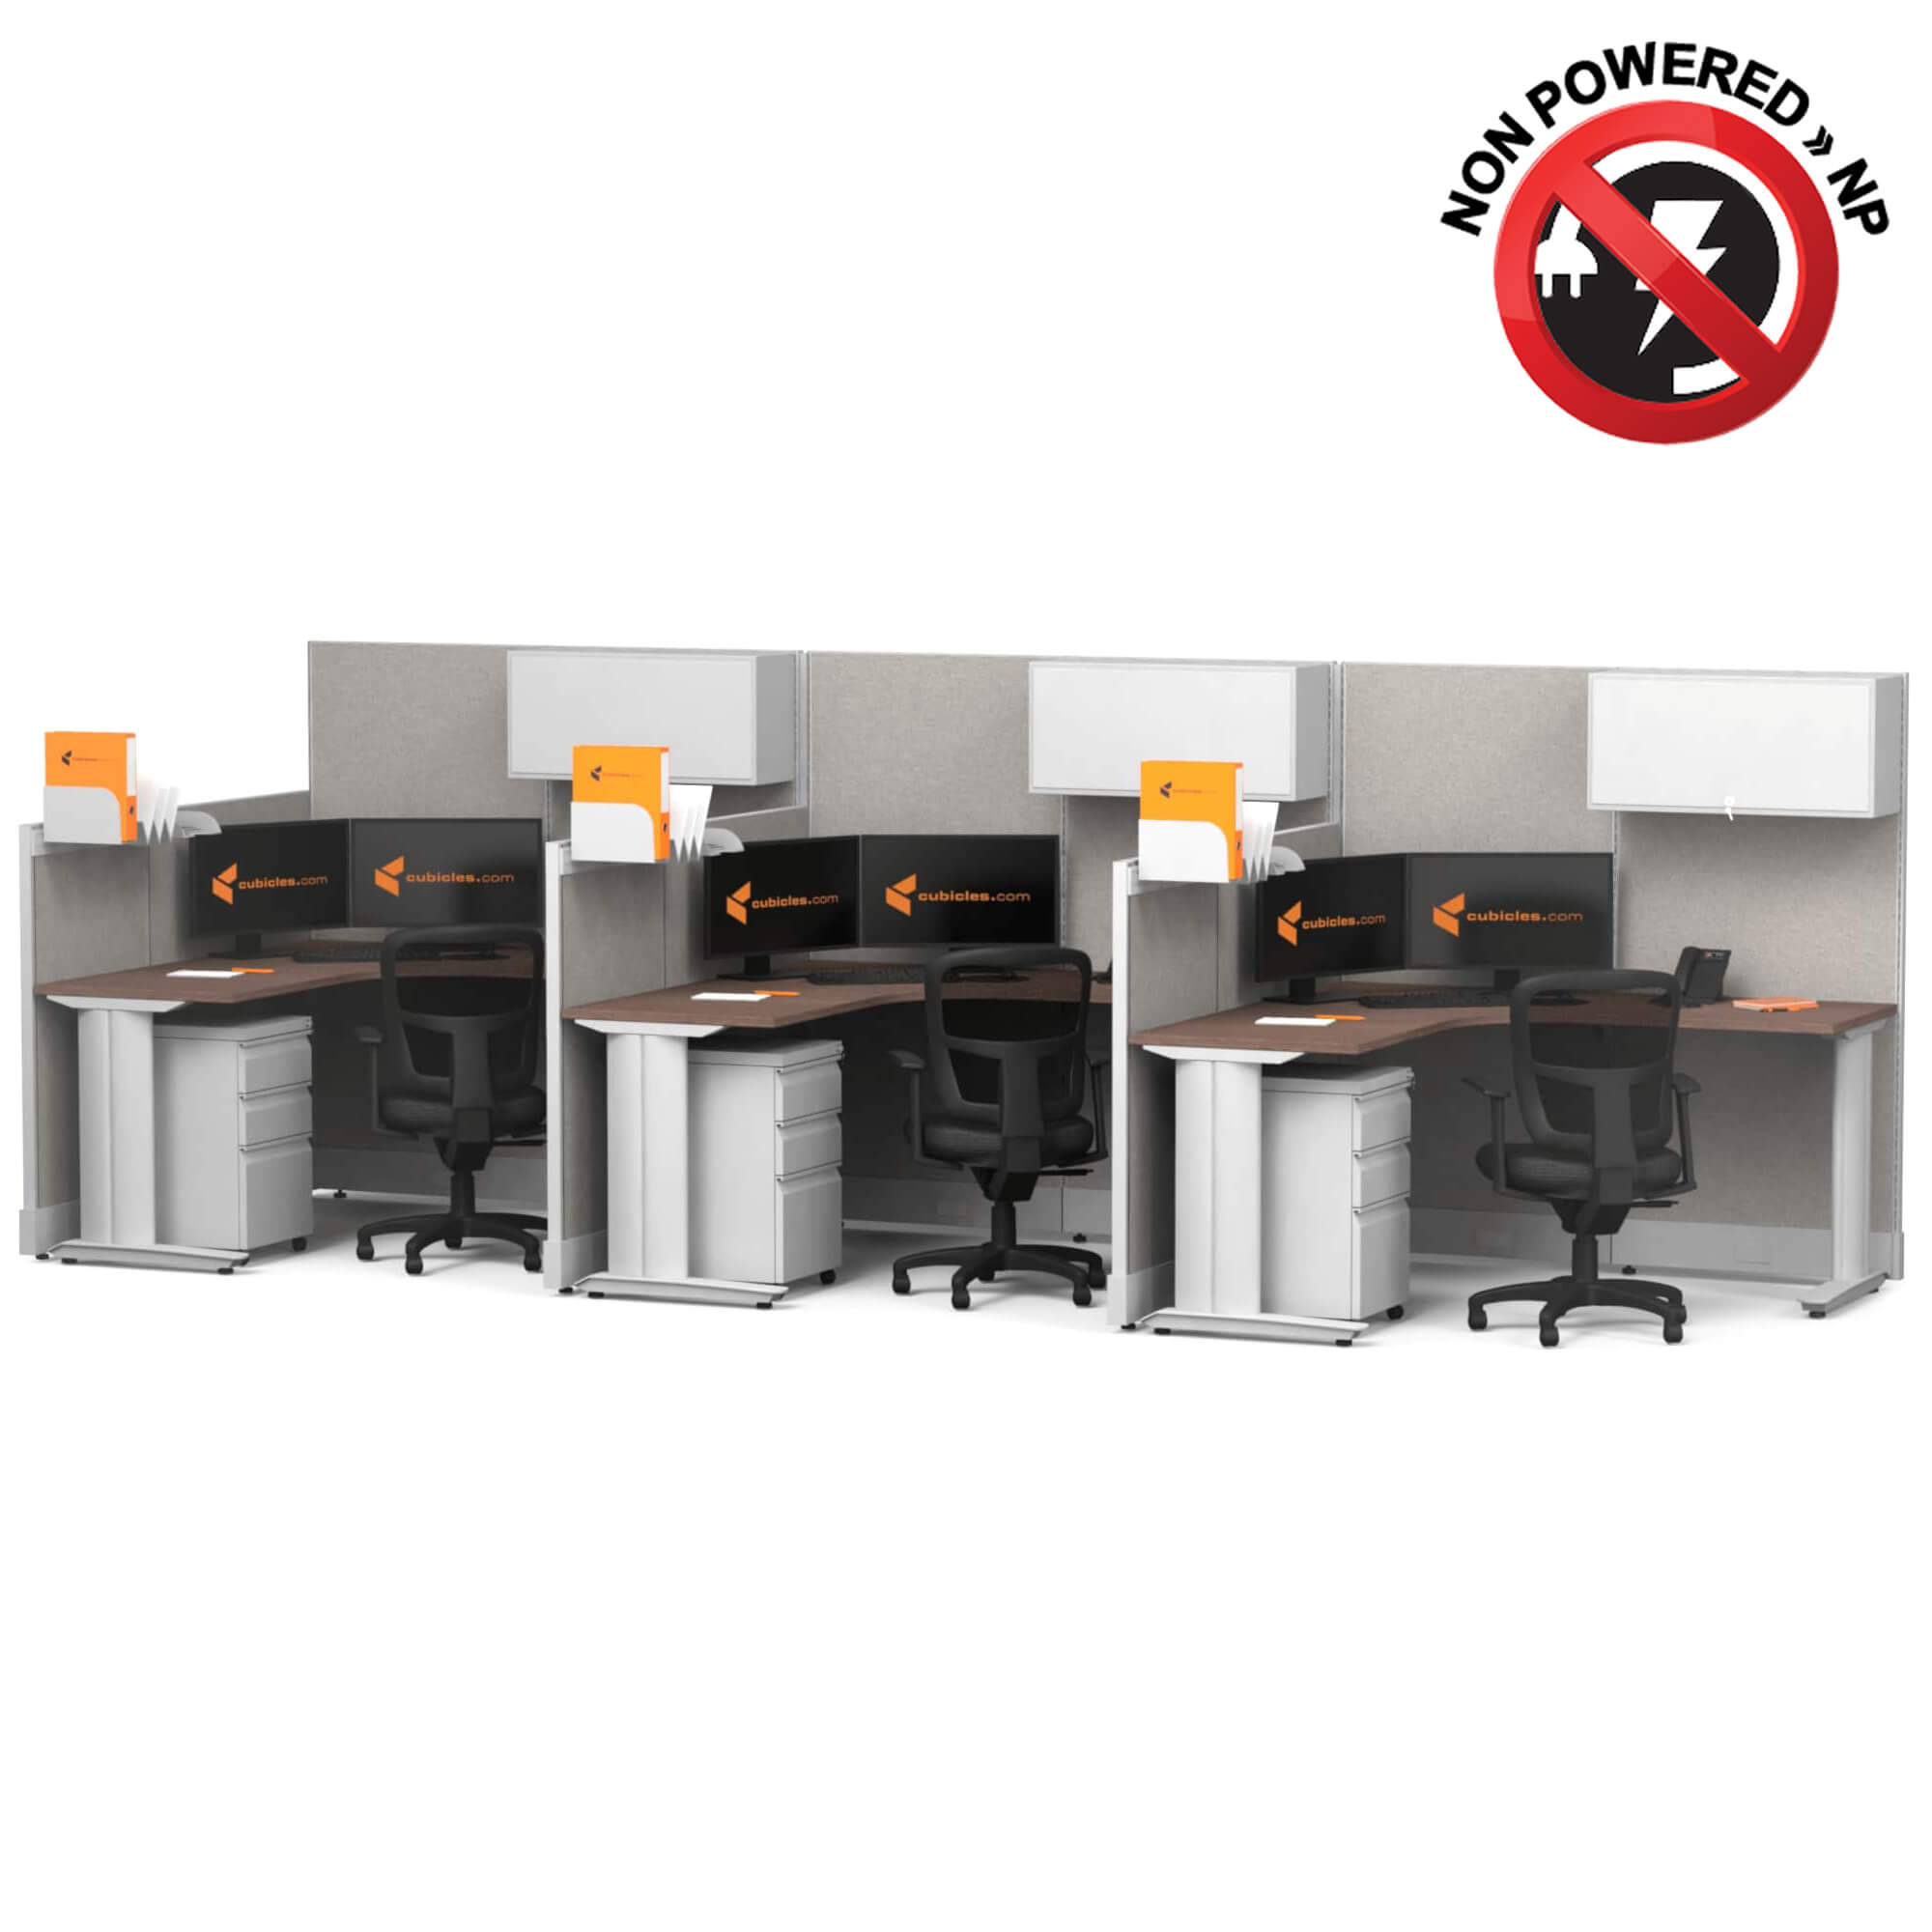 Cubicle desk l shaped with storage 3pack non powered